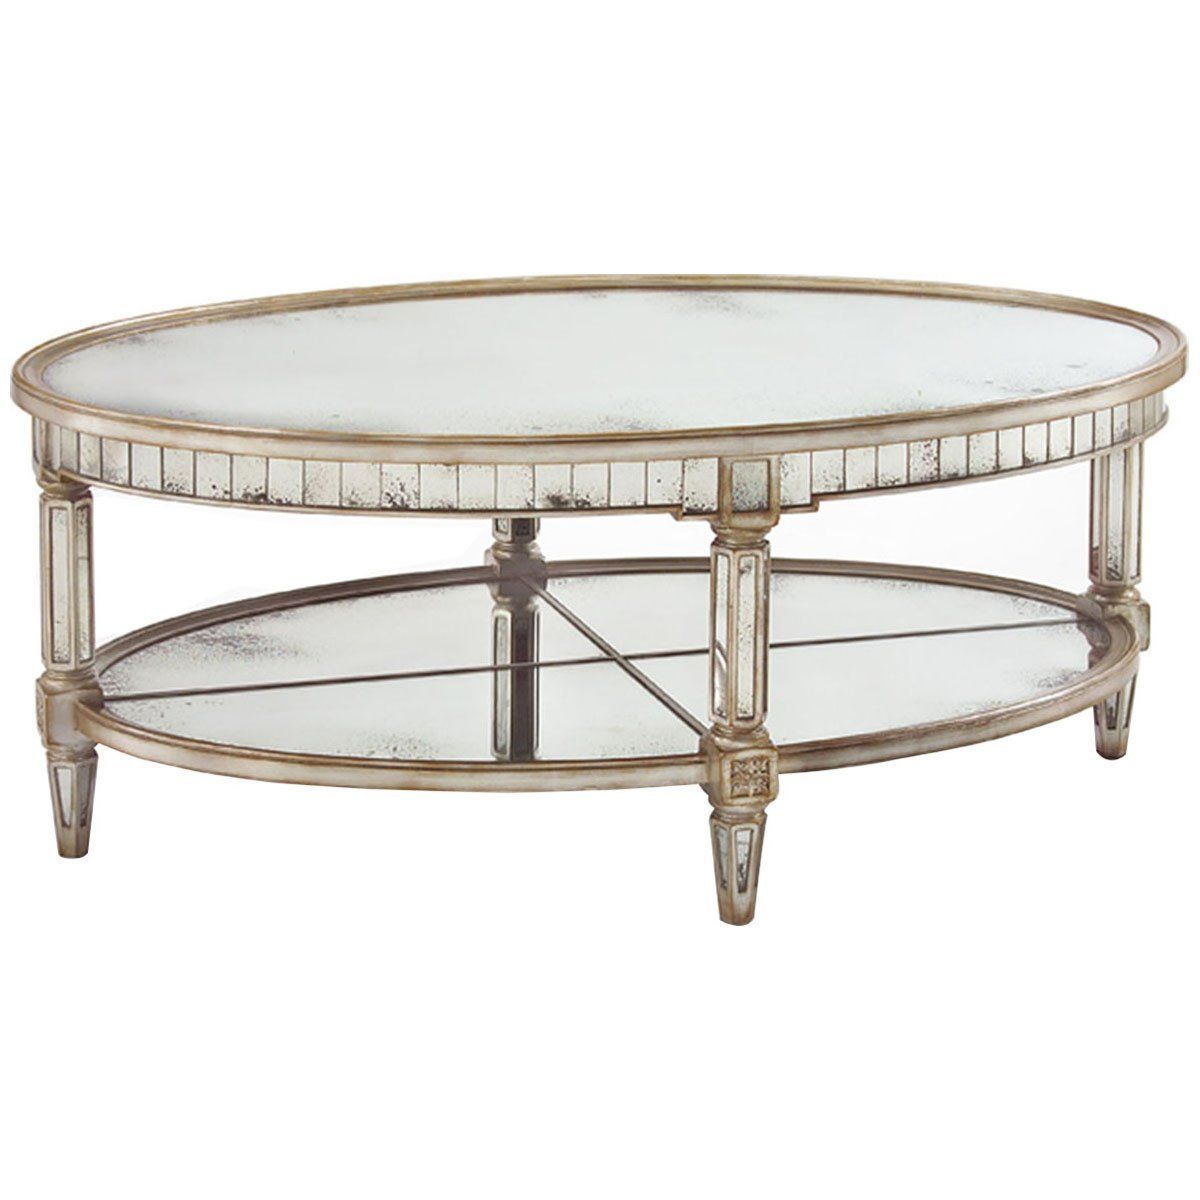 John Richard Parisian Silver Keswick Oval Cocktail Table In Antique Silver Metal Coffee Tables (View 12 of 15)